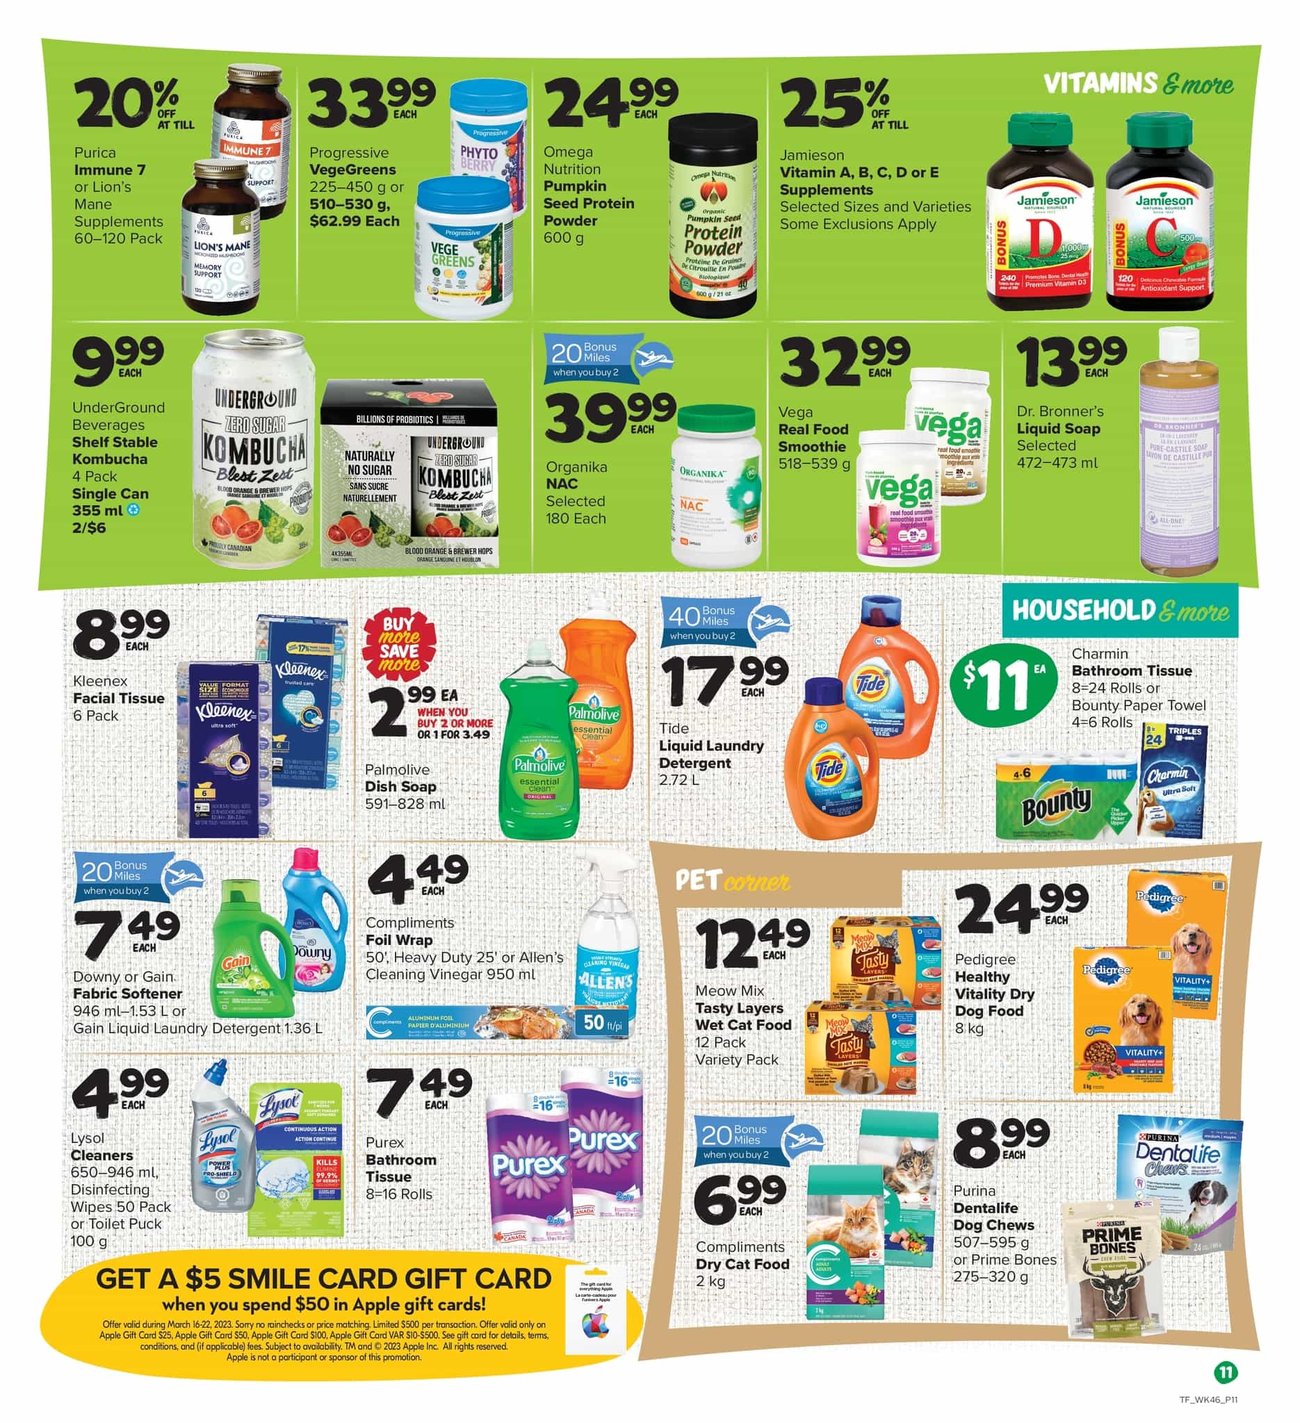 Thrifty Foods - Weekly Flyer Specials - Page 11